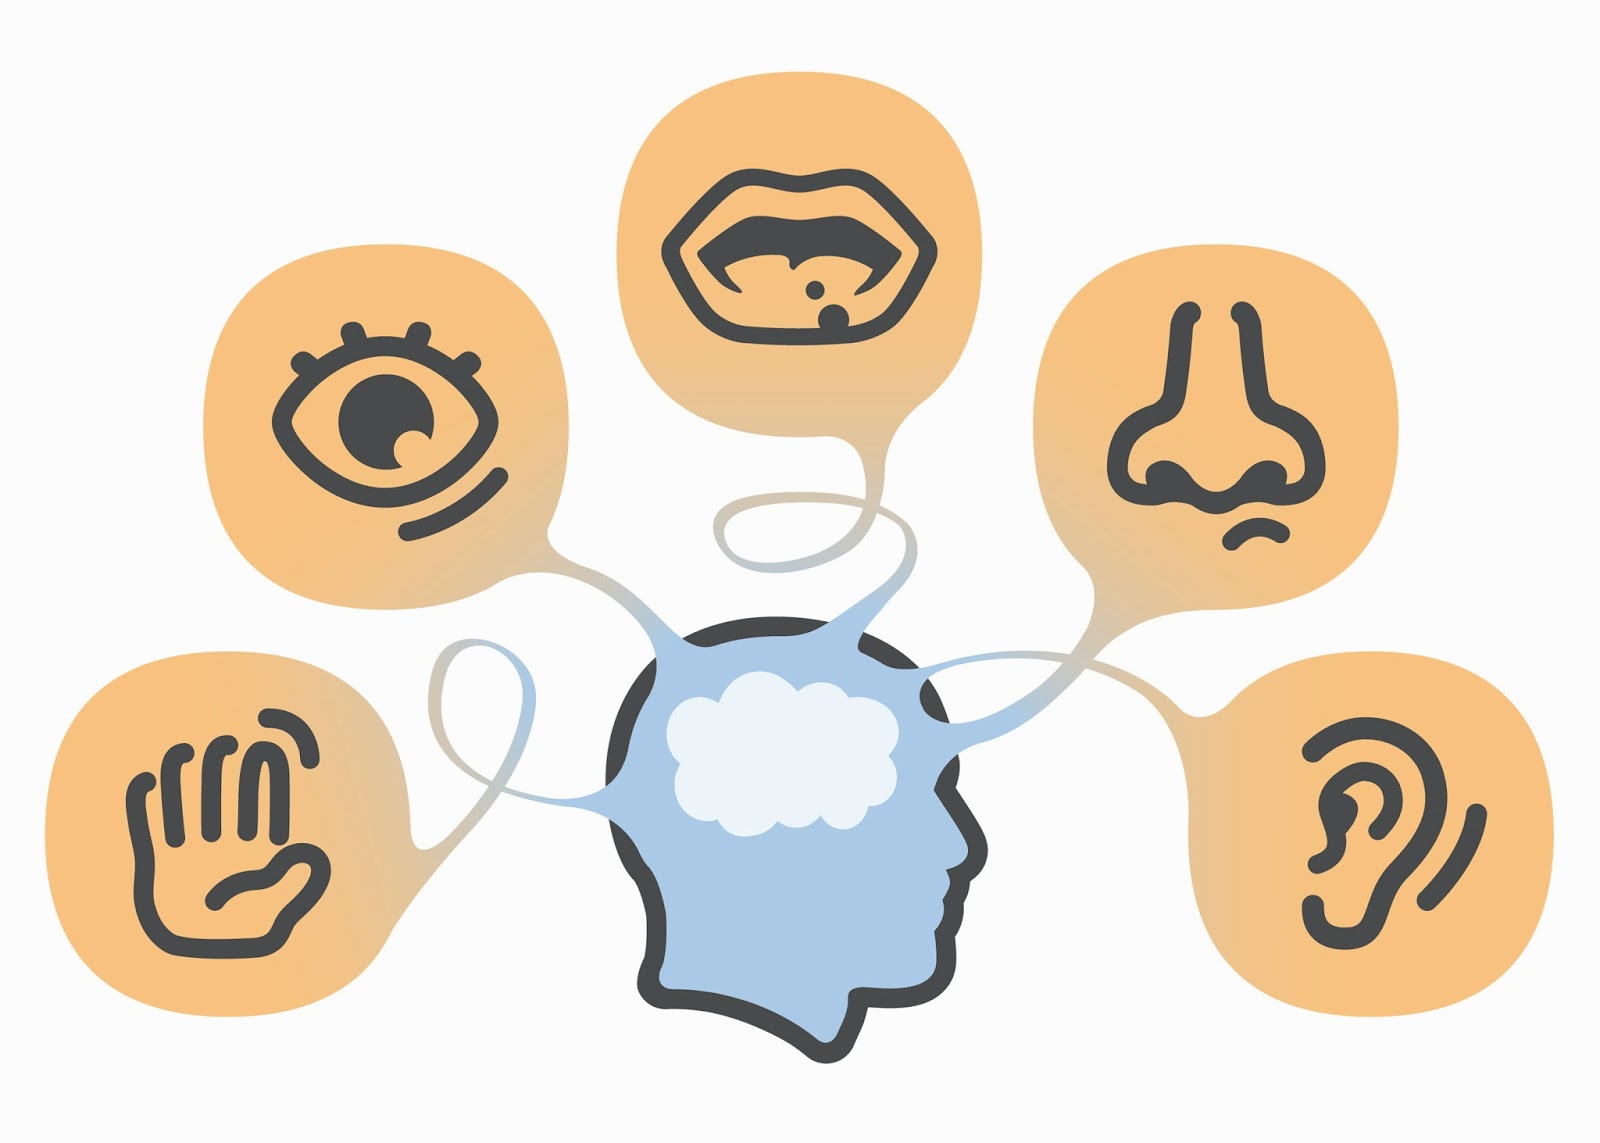 clip art of human head with icons of the 5 senses